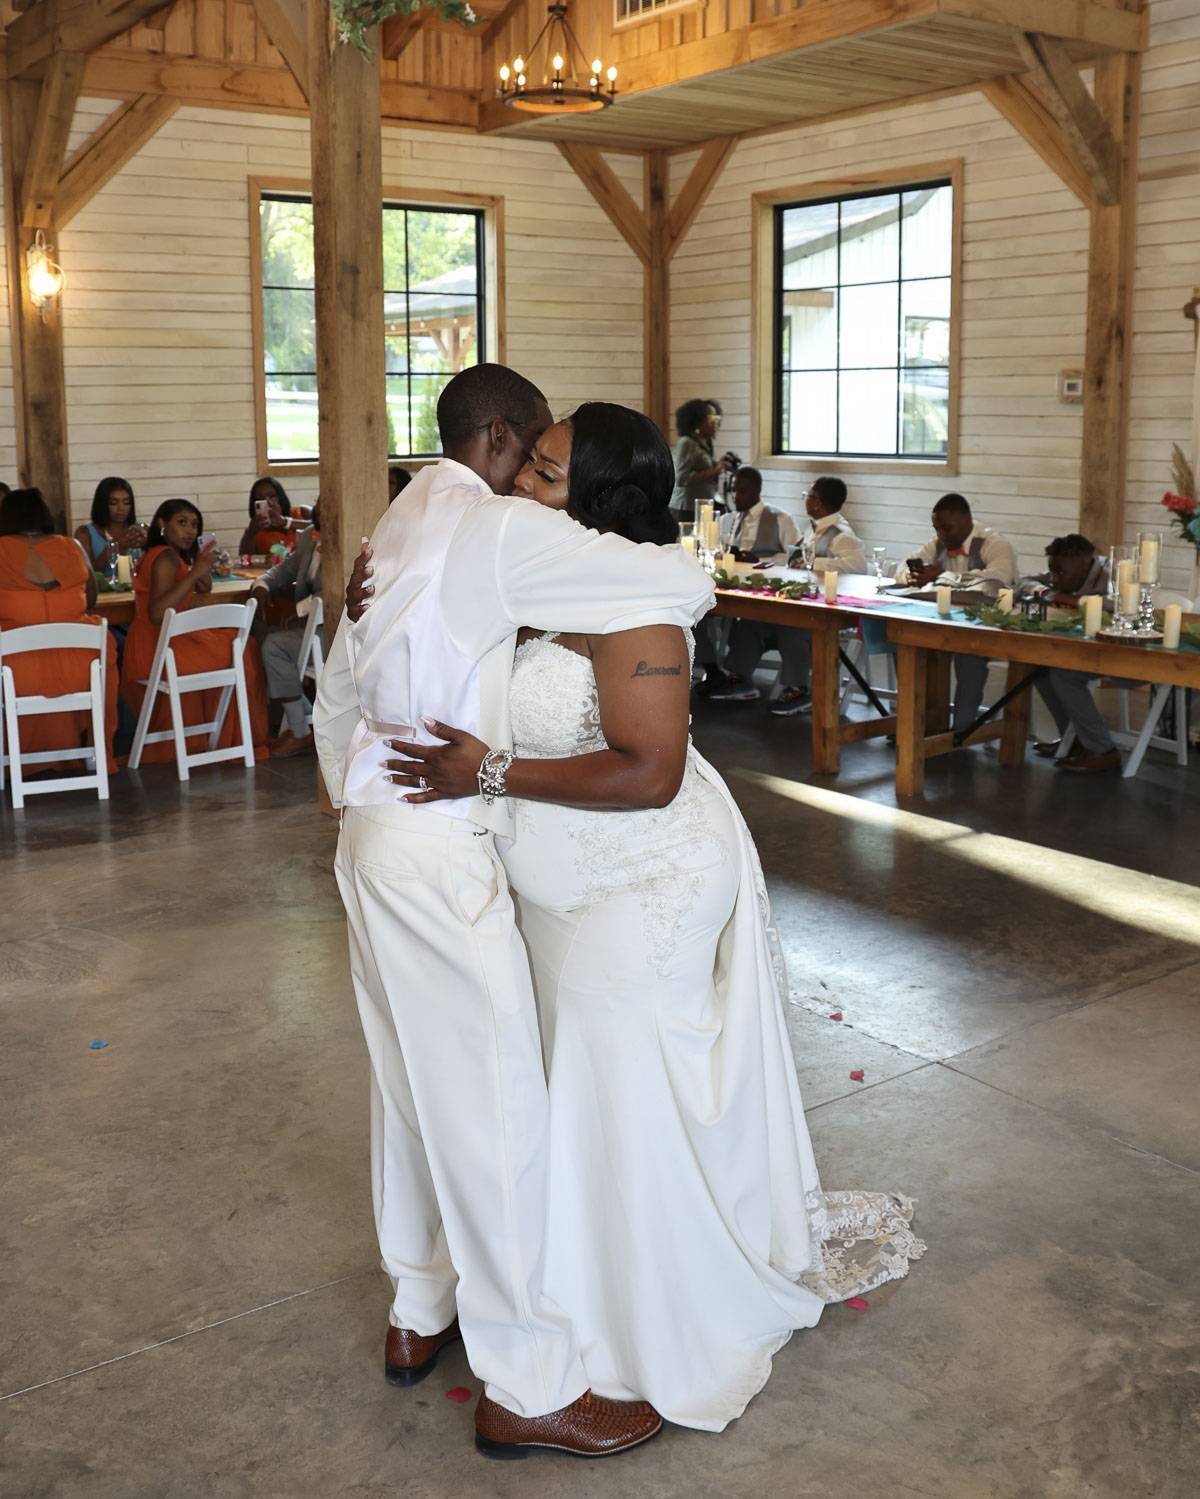 The bride and groom hugging